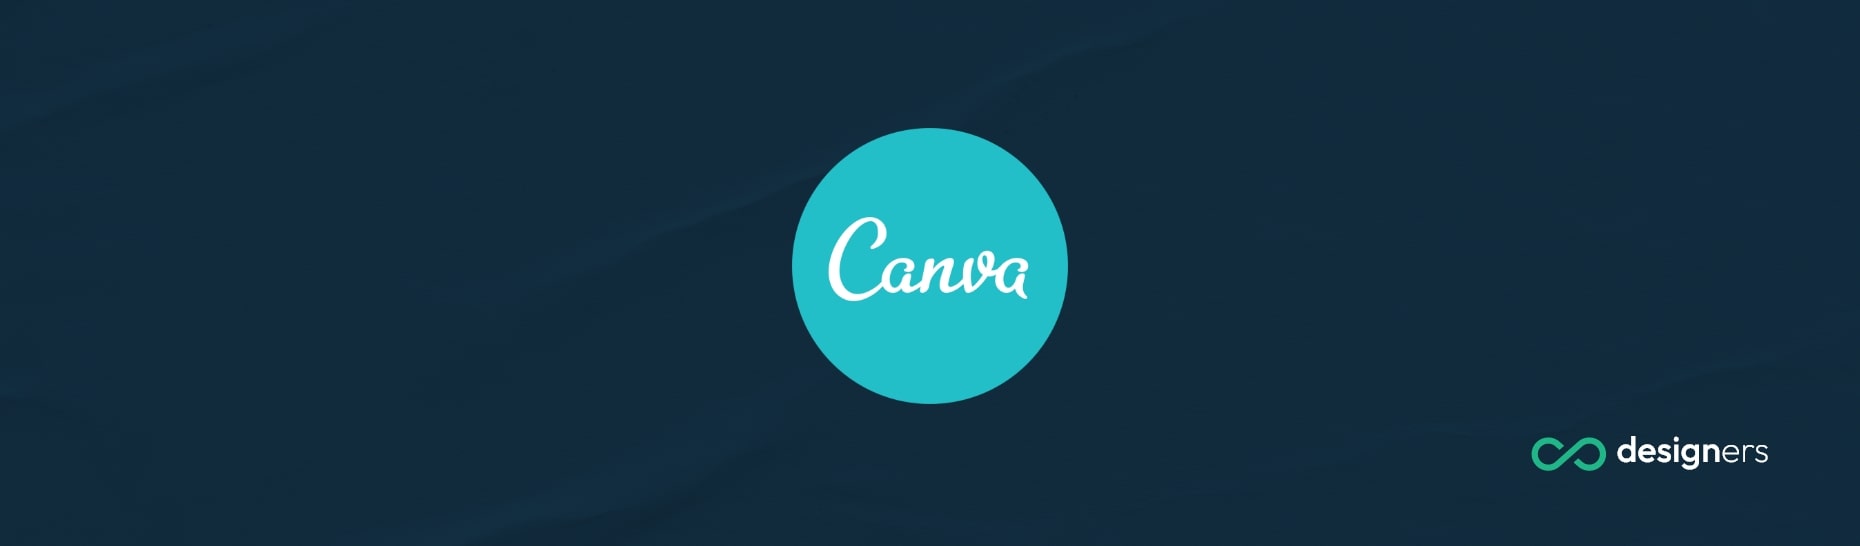 Does Canva Have Good Fonts?